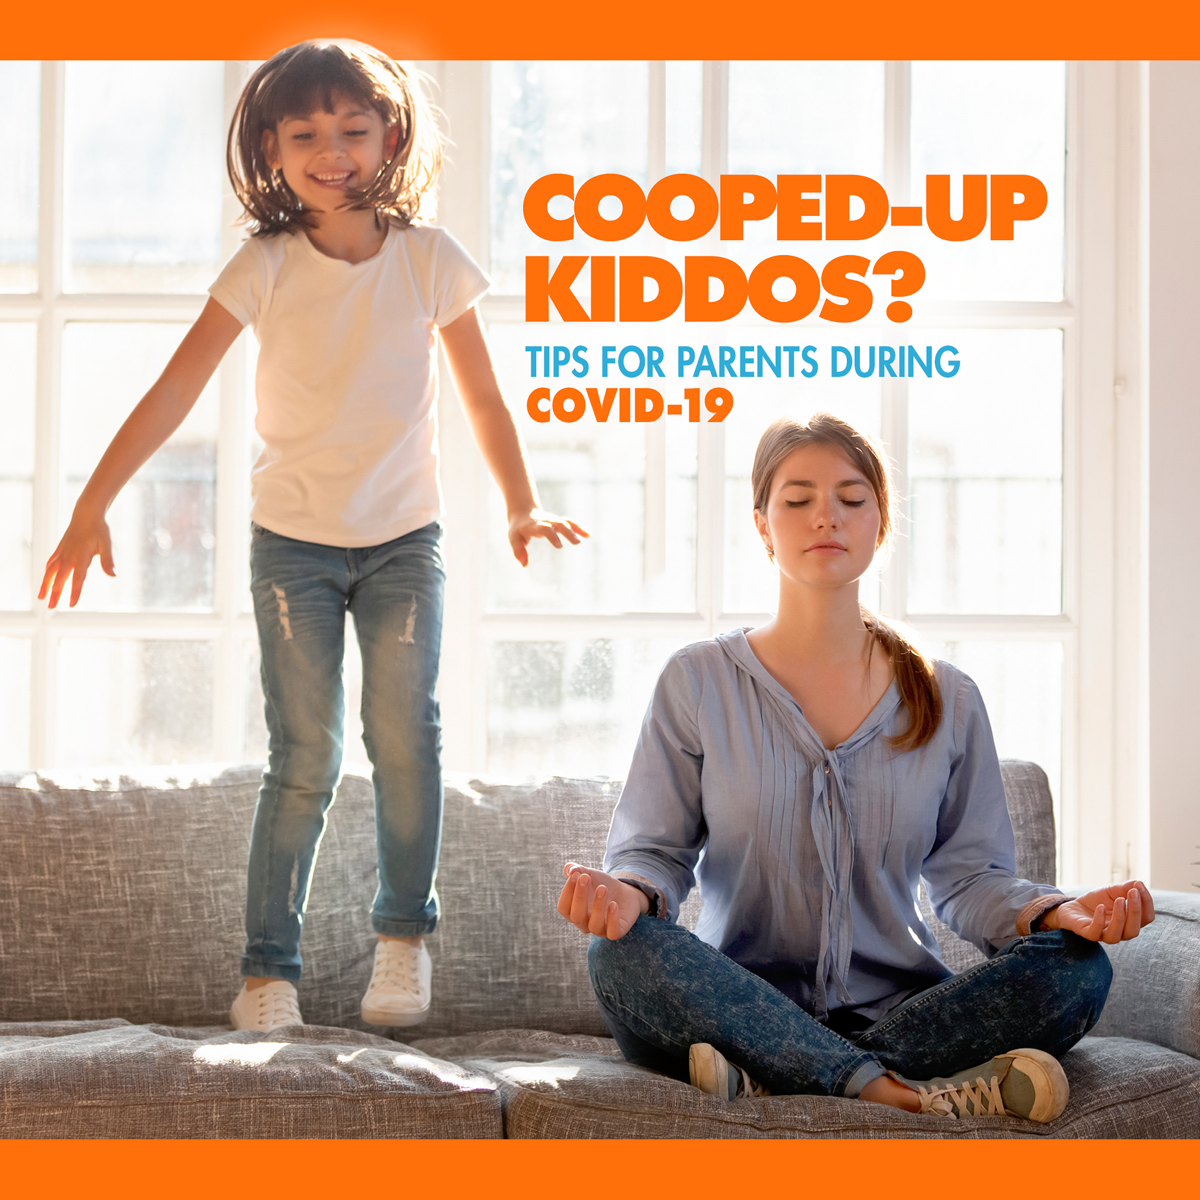 Cooped-up kids? Tips for parents during covid-19